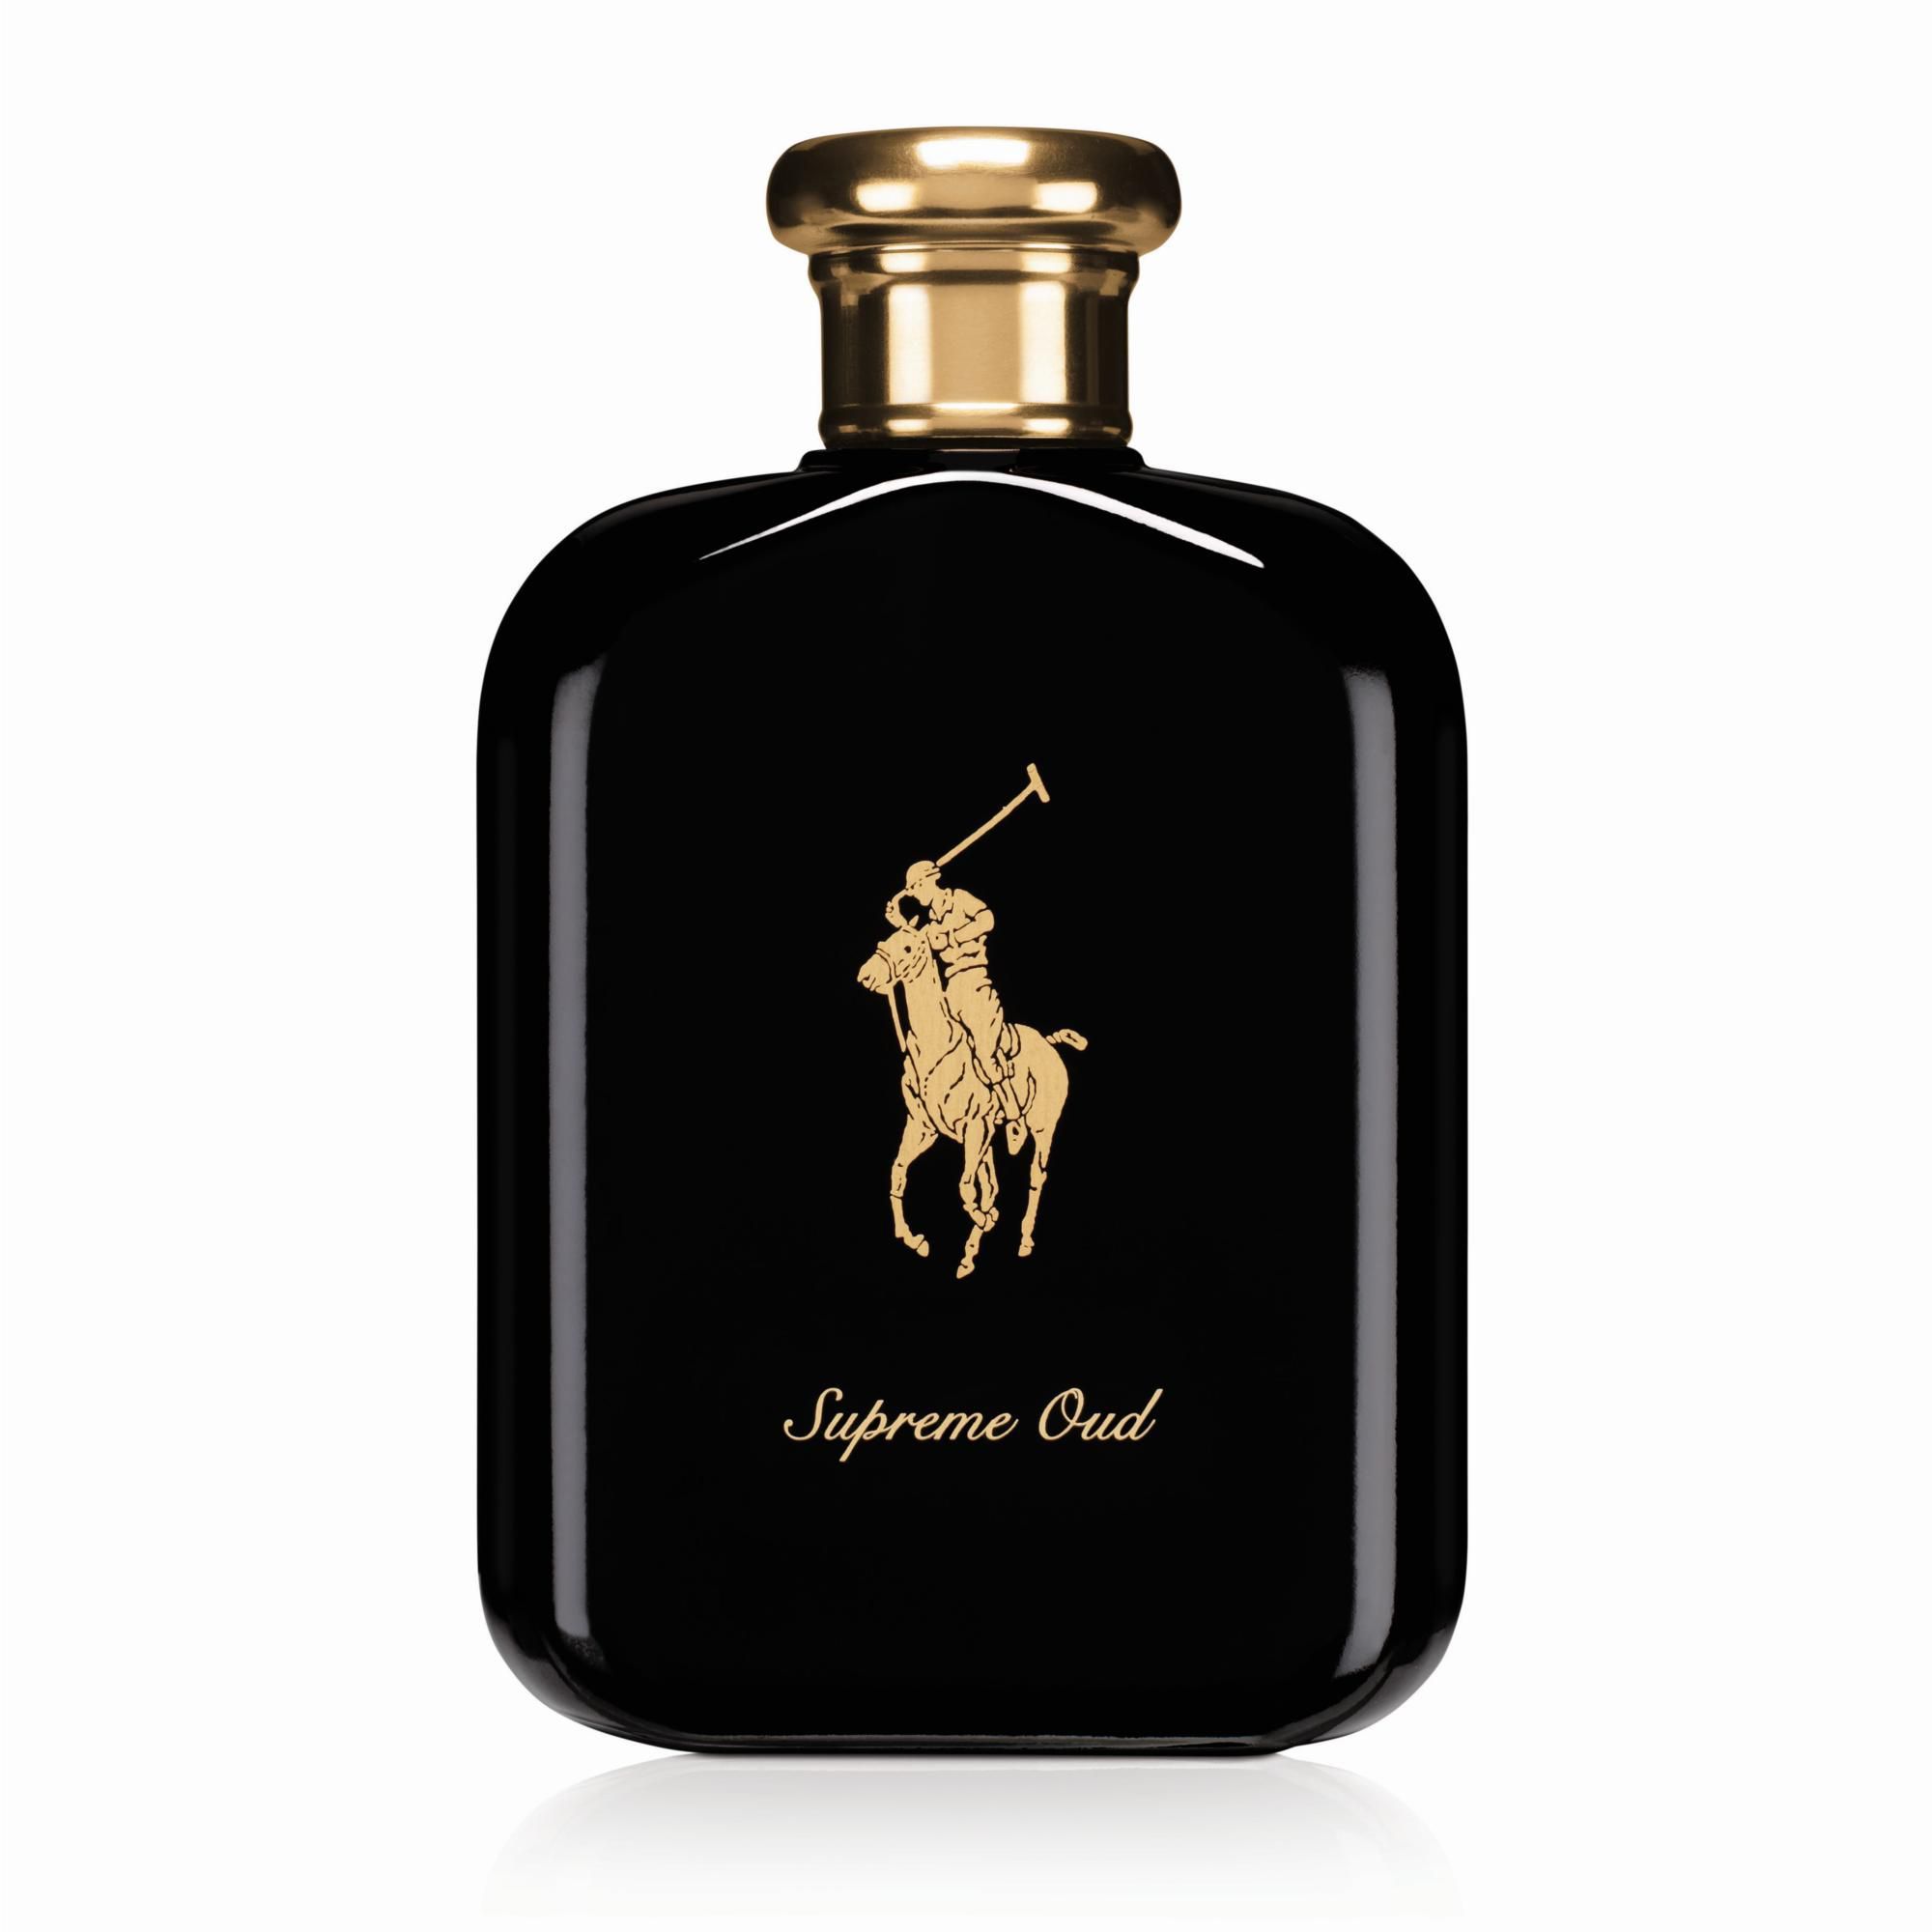 polo supreme oud macy's - Just Me and 